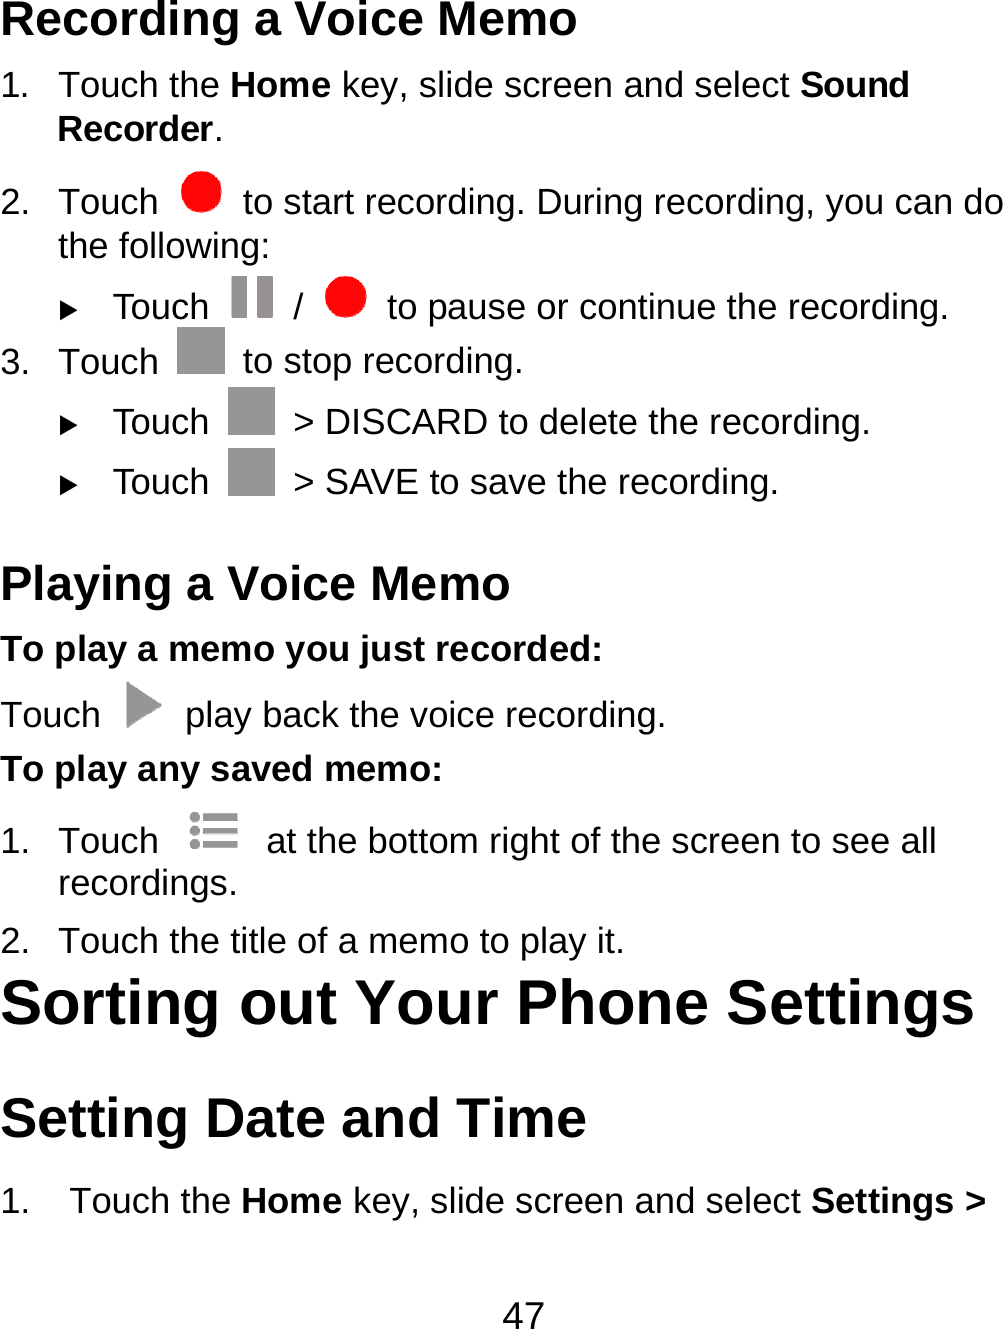 47 Recording a Voice Memo 1. Touch the Home key, slide screen and select Sound Recorder. 2. Touch    to start recording. During recording, you can do the following:  Touch   /    to pause or continue the recording. 3. Touch    to stop recording.    Touch    &gt; DISCARD to delete the recording.  Touch    &gt; SAVE to save the recording. Playing a Voice Memo To play a memo you just recorded: Touch    play back the voice recording. To play any saved memo: 1. Touch    at the bottom right of the screen to see all recordings. 2.  Touch the title of a memo to play it. Sorting out Your Phone Settings Setting Date and Time 1. Touch the Home key, slide screen and select Settings &gt; 